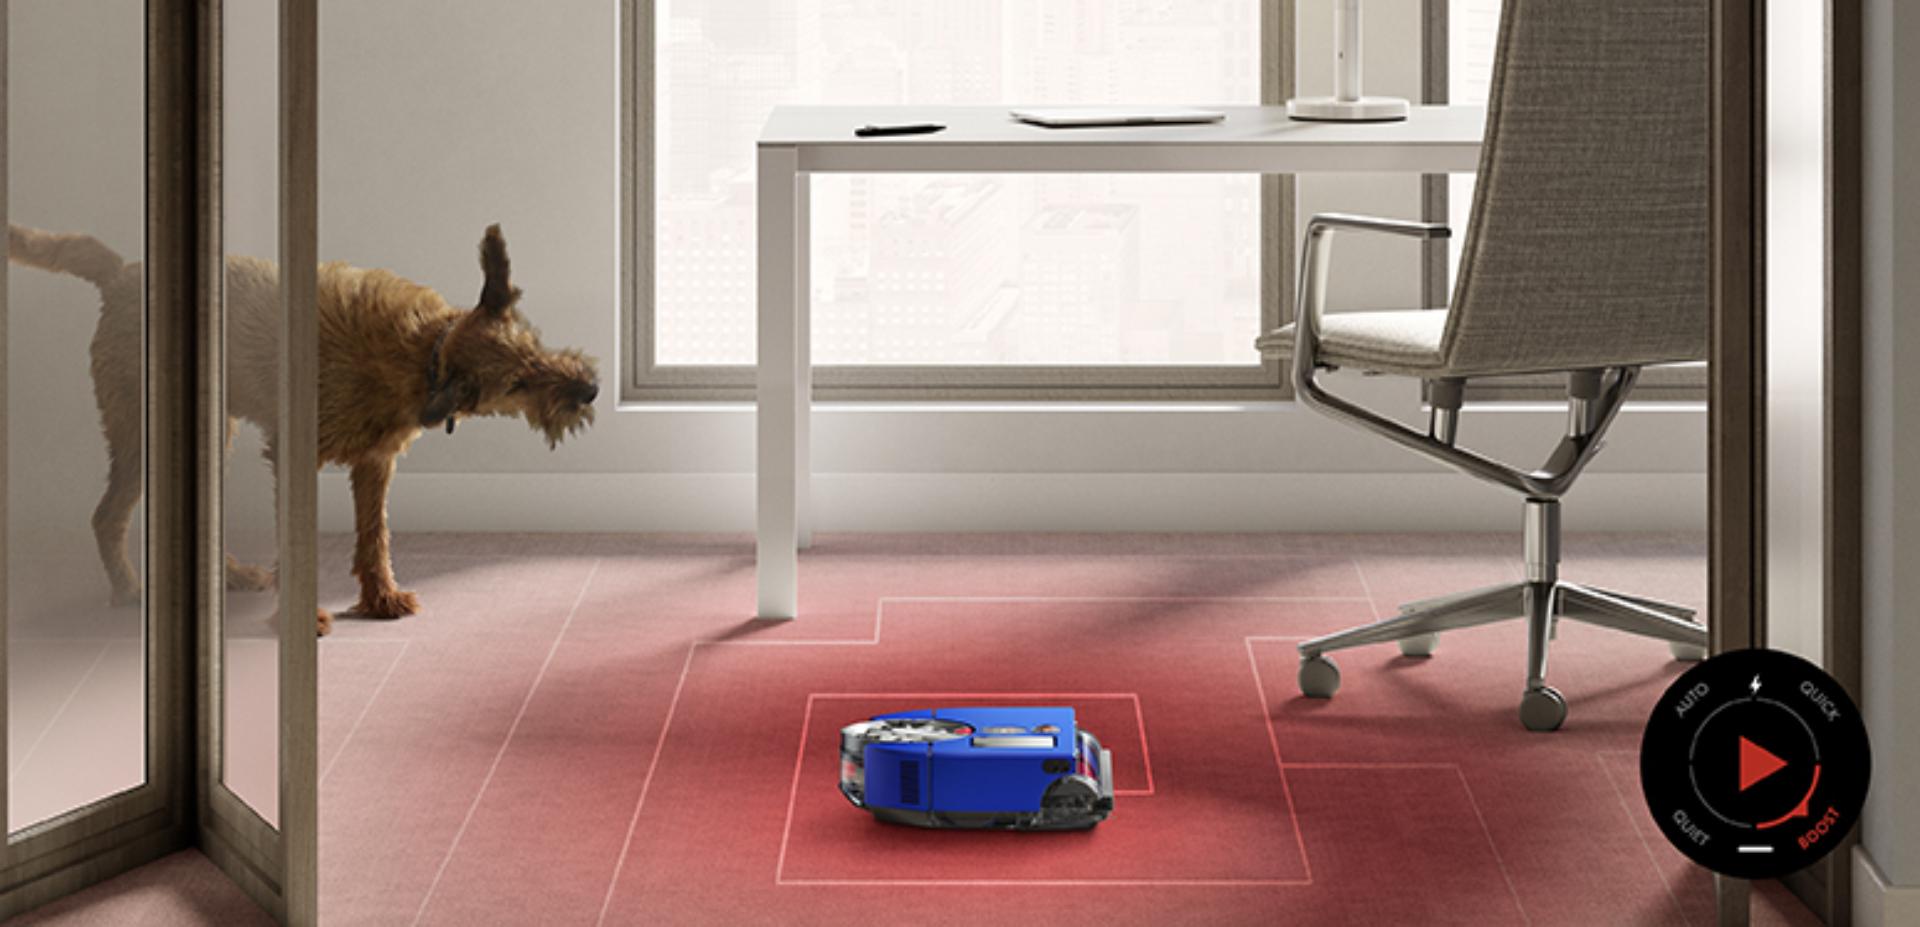 The robot vacuum cleaning an area where a pet is shaking fur